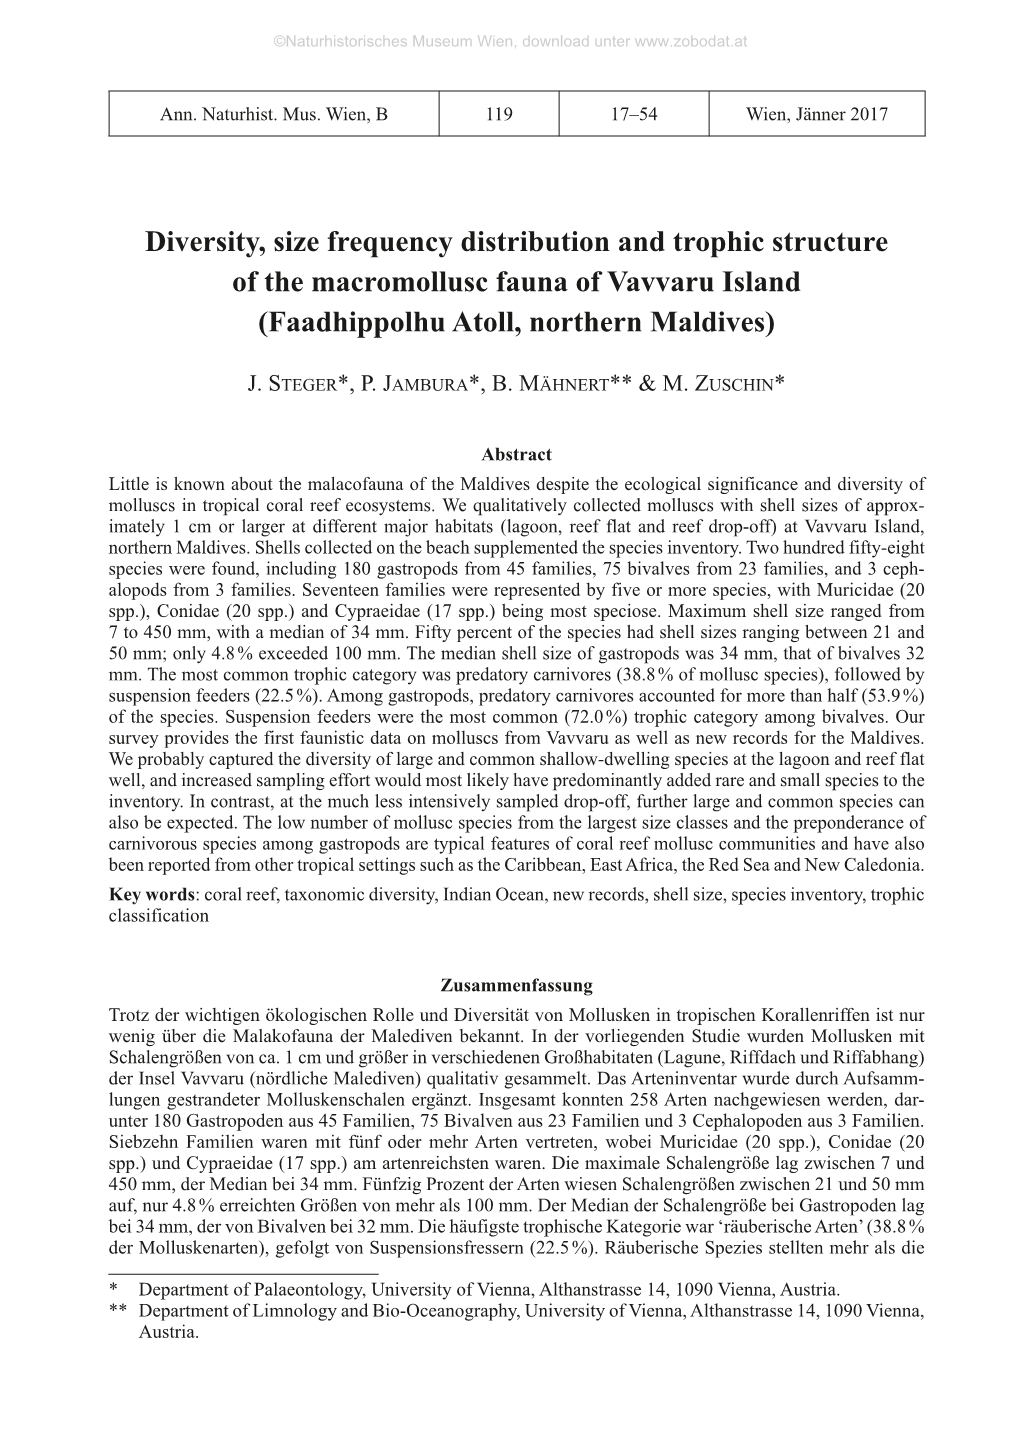 Diversity, Size Frequency Distribution and Trophic Structure of the Macromollusc Fauna of Vavvaru Island (Faadhippolhu Atoll, Northern Maldives)